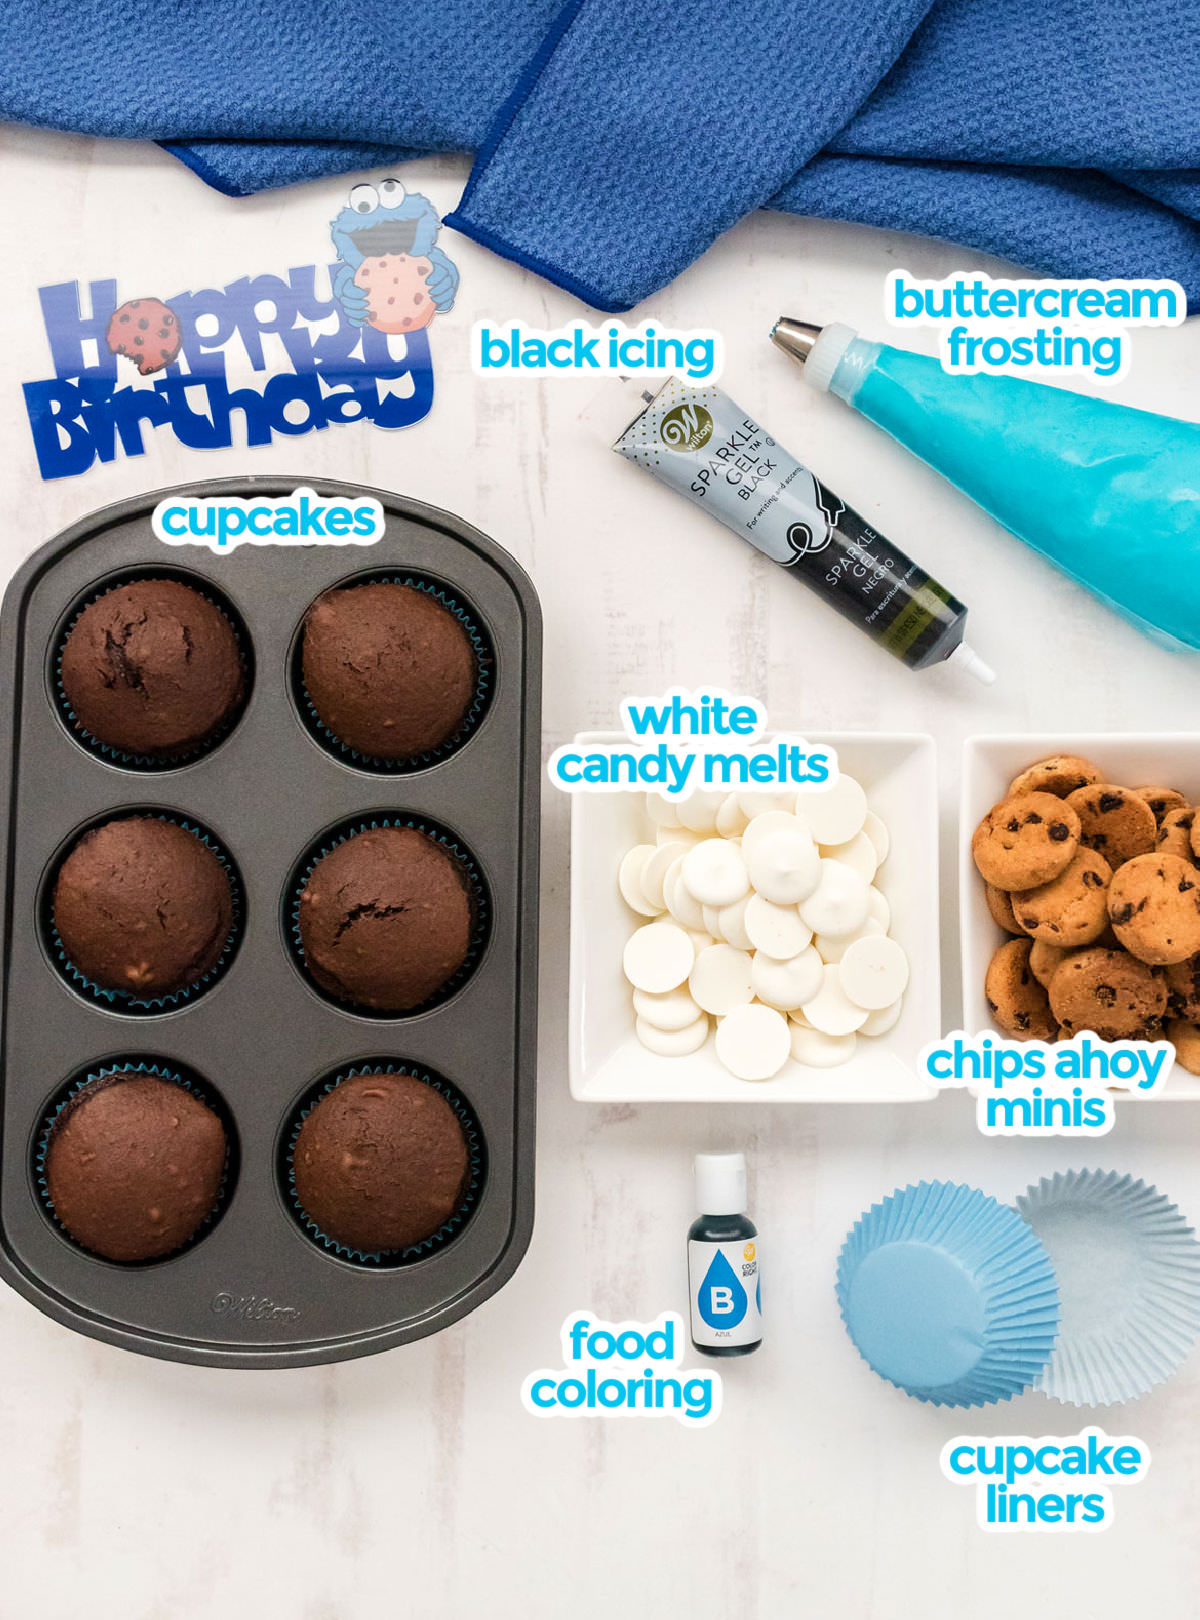 All the ingredients you will need to make Cookie Monster Cupcakes including cupcakes, buttercream frosting, black icing, candy melts, mini Chips Ahoy cookies, food coloring and cupcake liners.